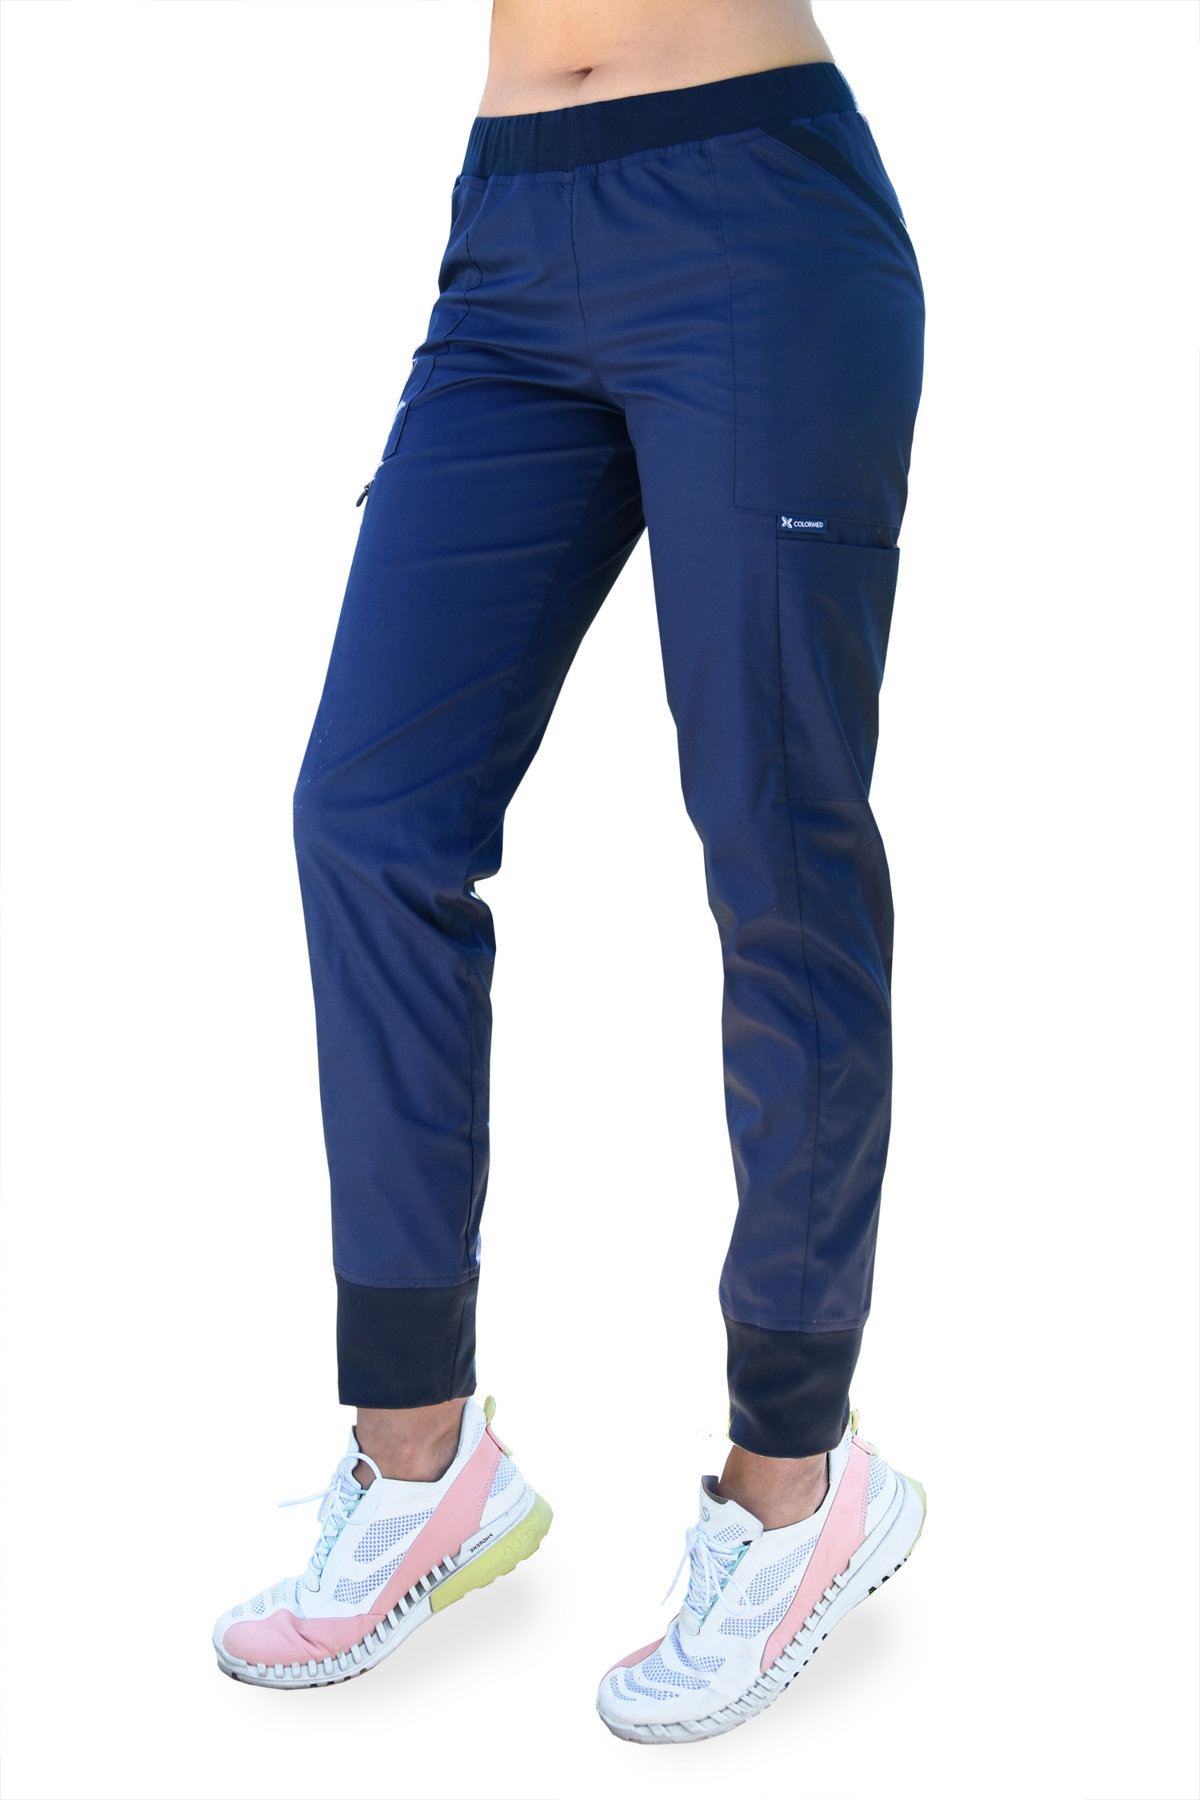 COLORMED Scrubs + clothes stripe, Medical SOFT pants with SE4-G2 | lime, a blue navy STRETCH,